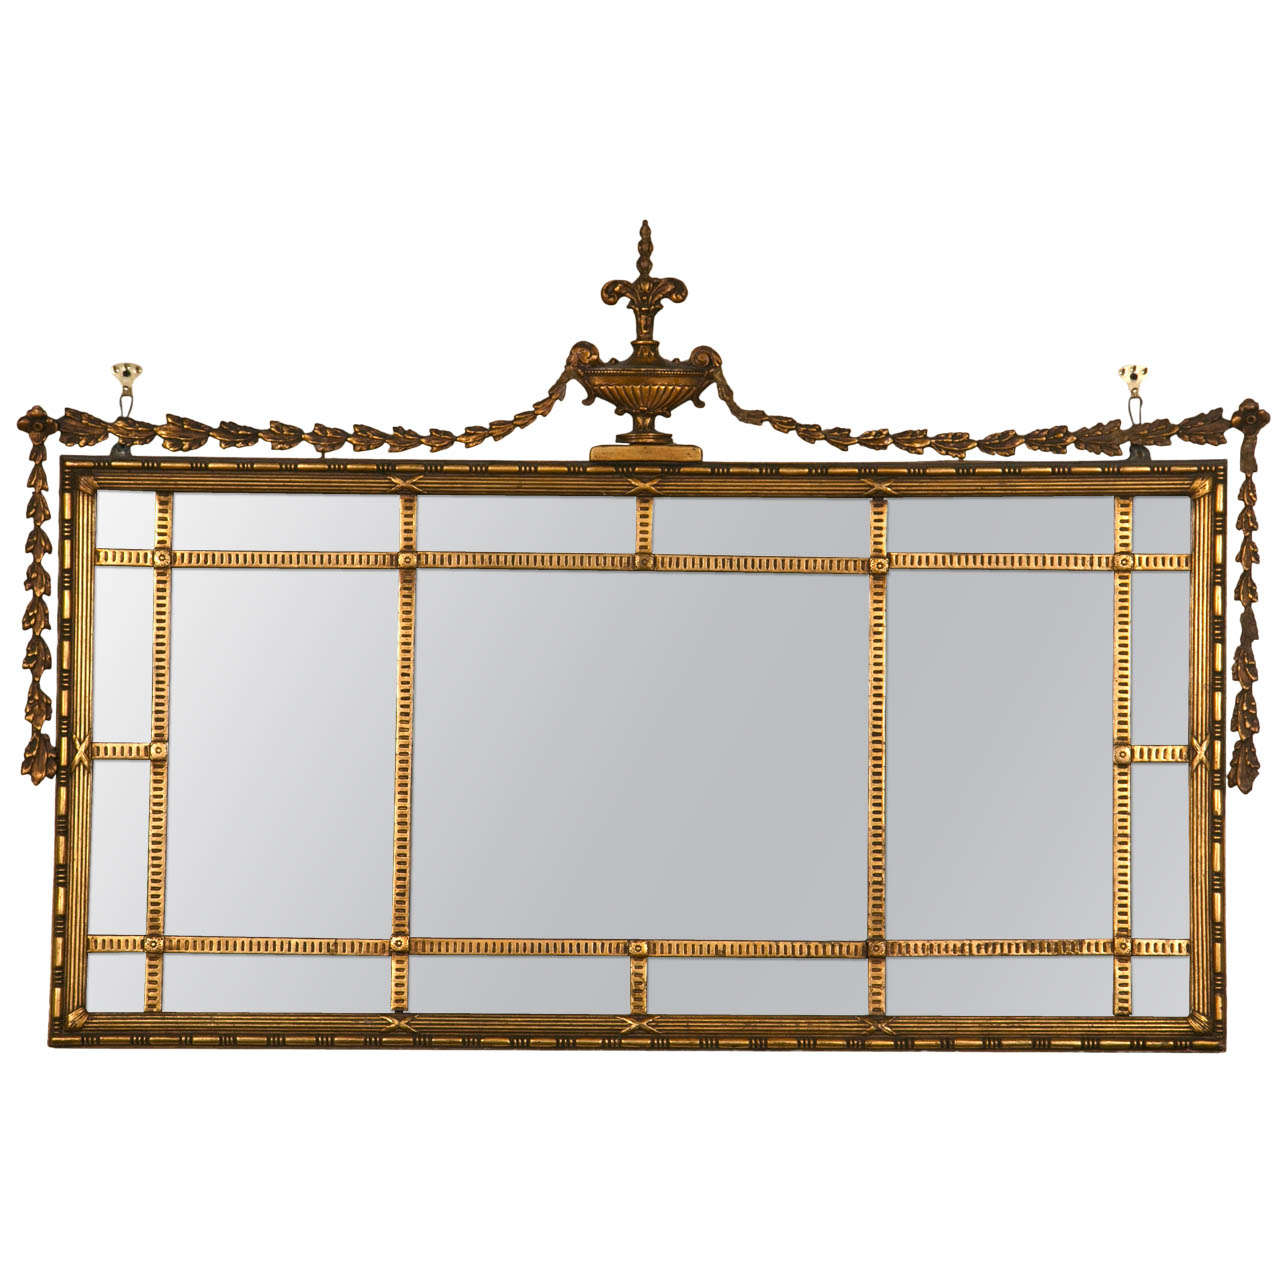 Early Adams Style Gilt Wooden Mirror